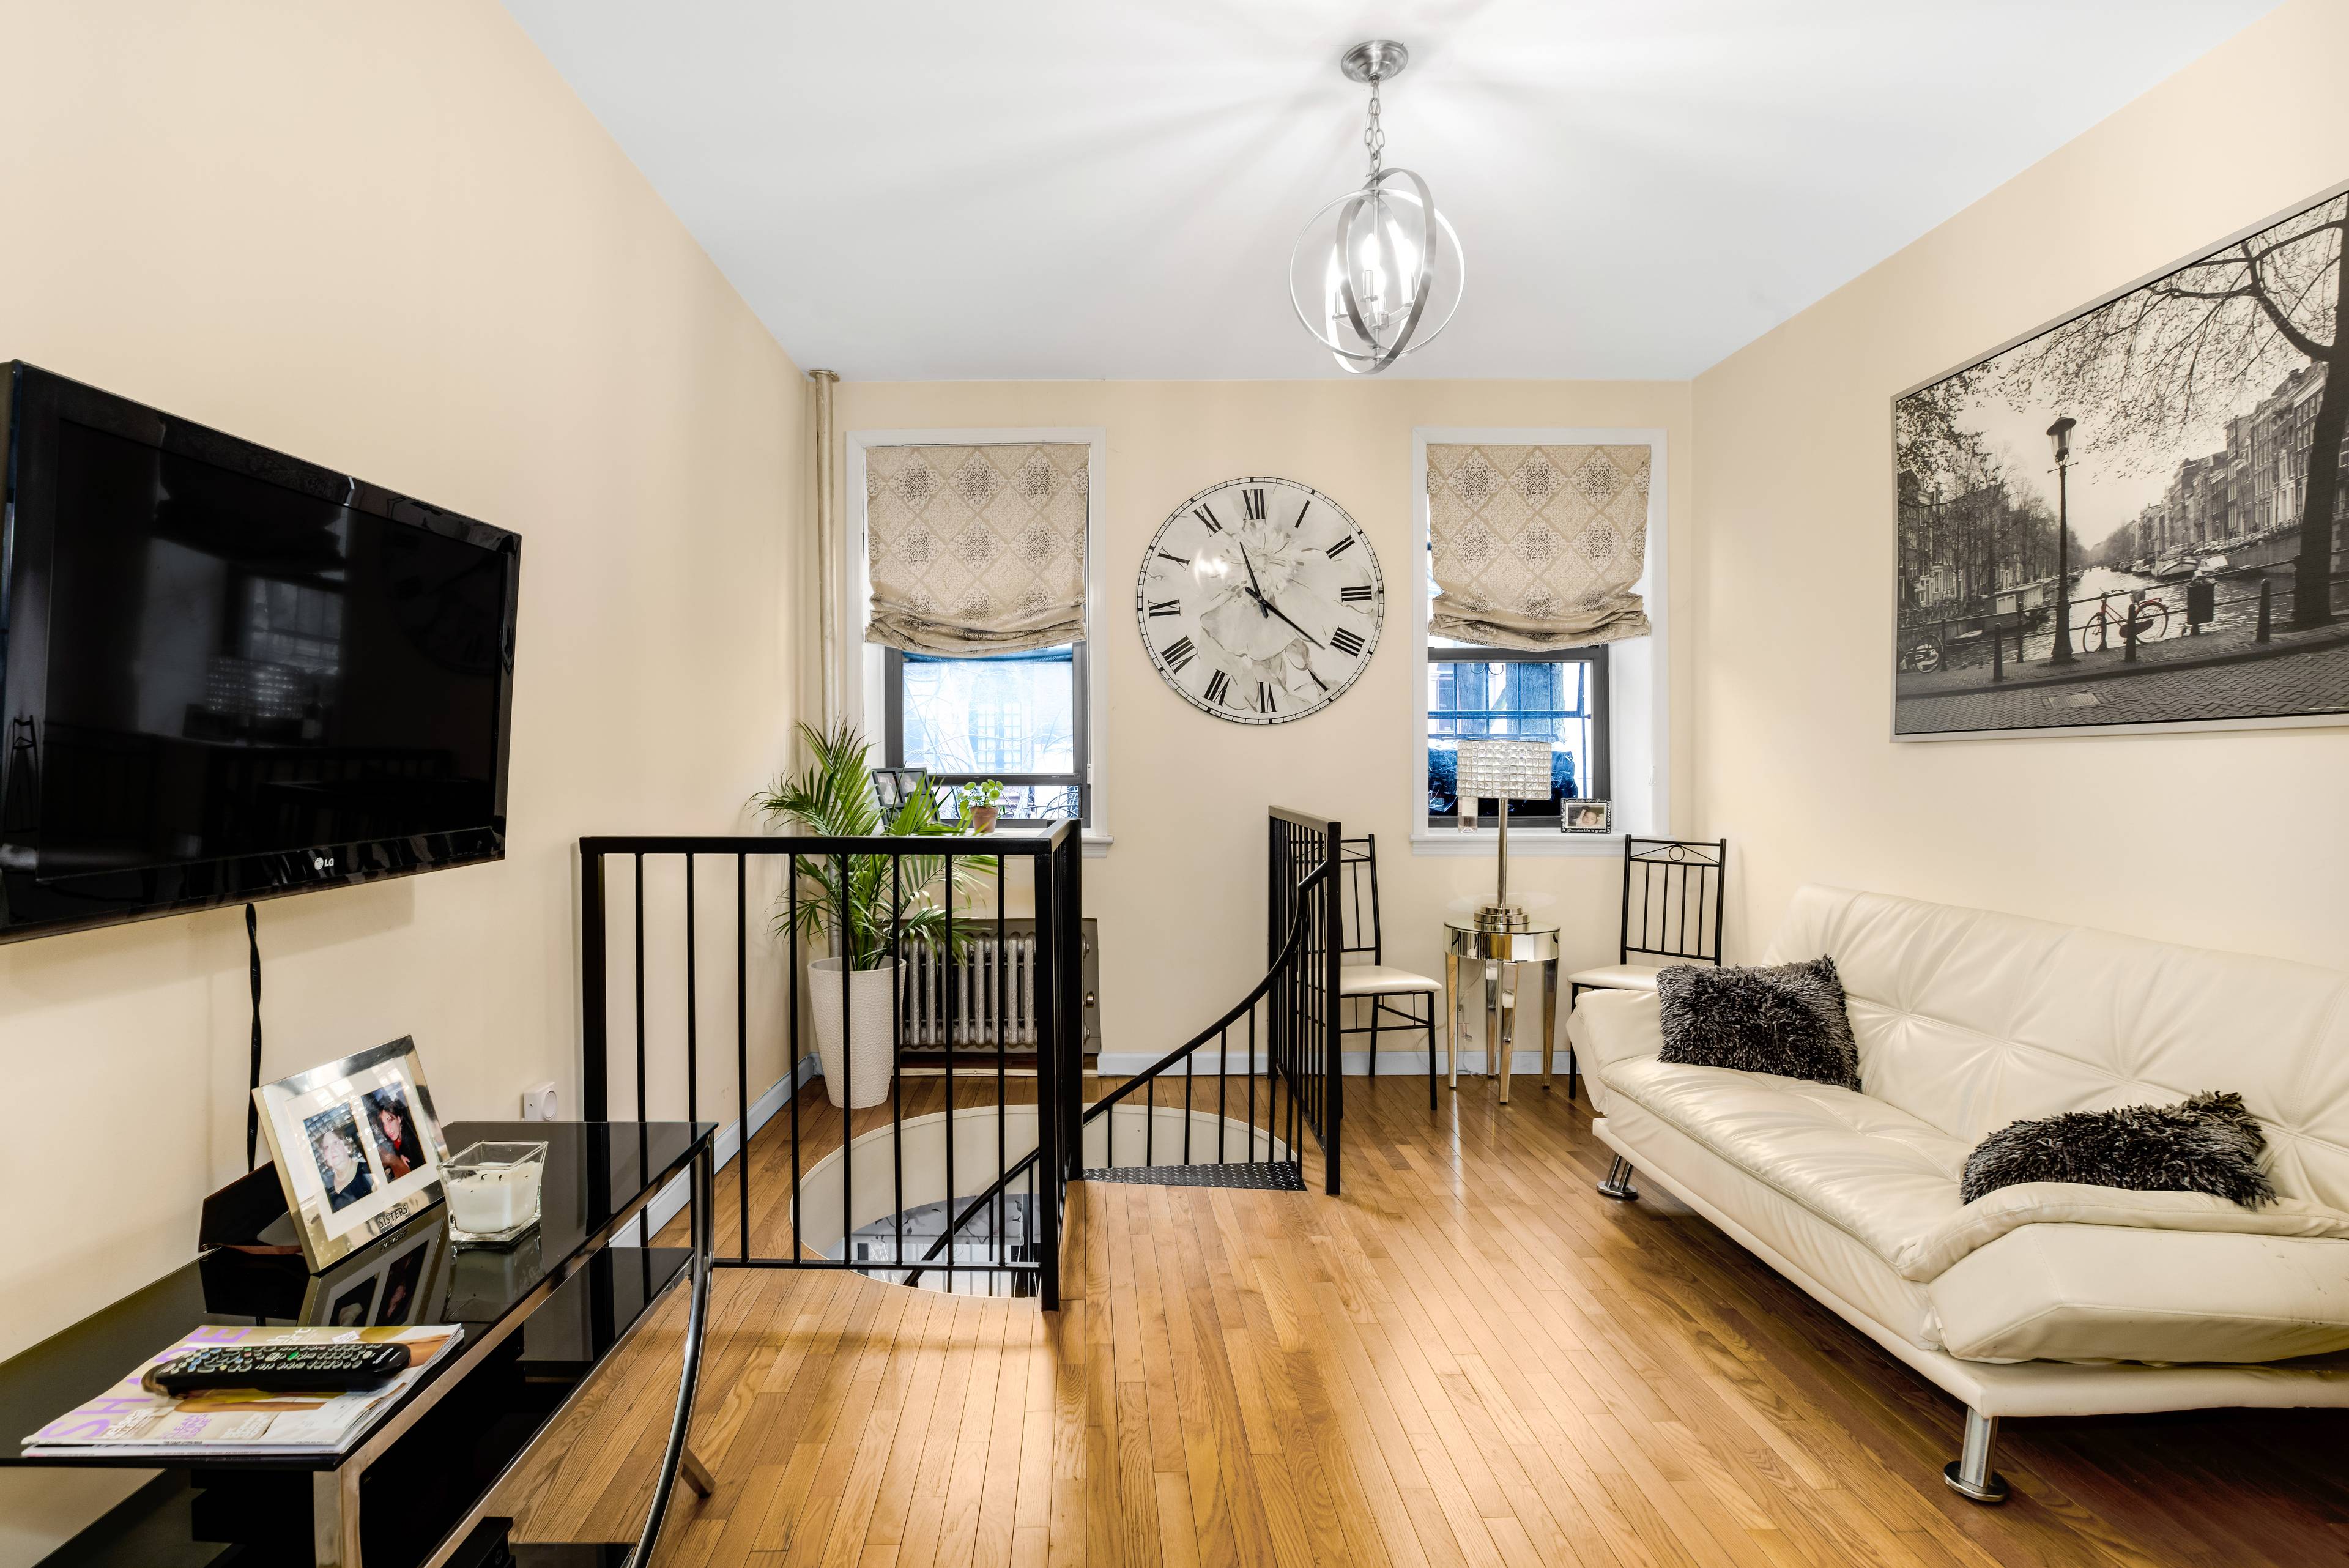 Enjoy spacious duplex living in the heart of Brownstone Brooklyn in this updated Park Slope co op home.